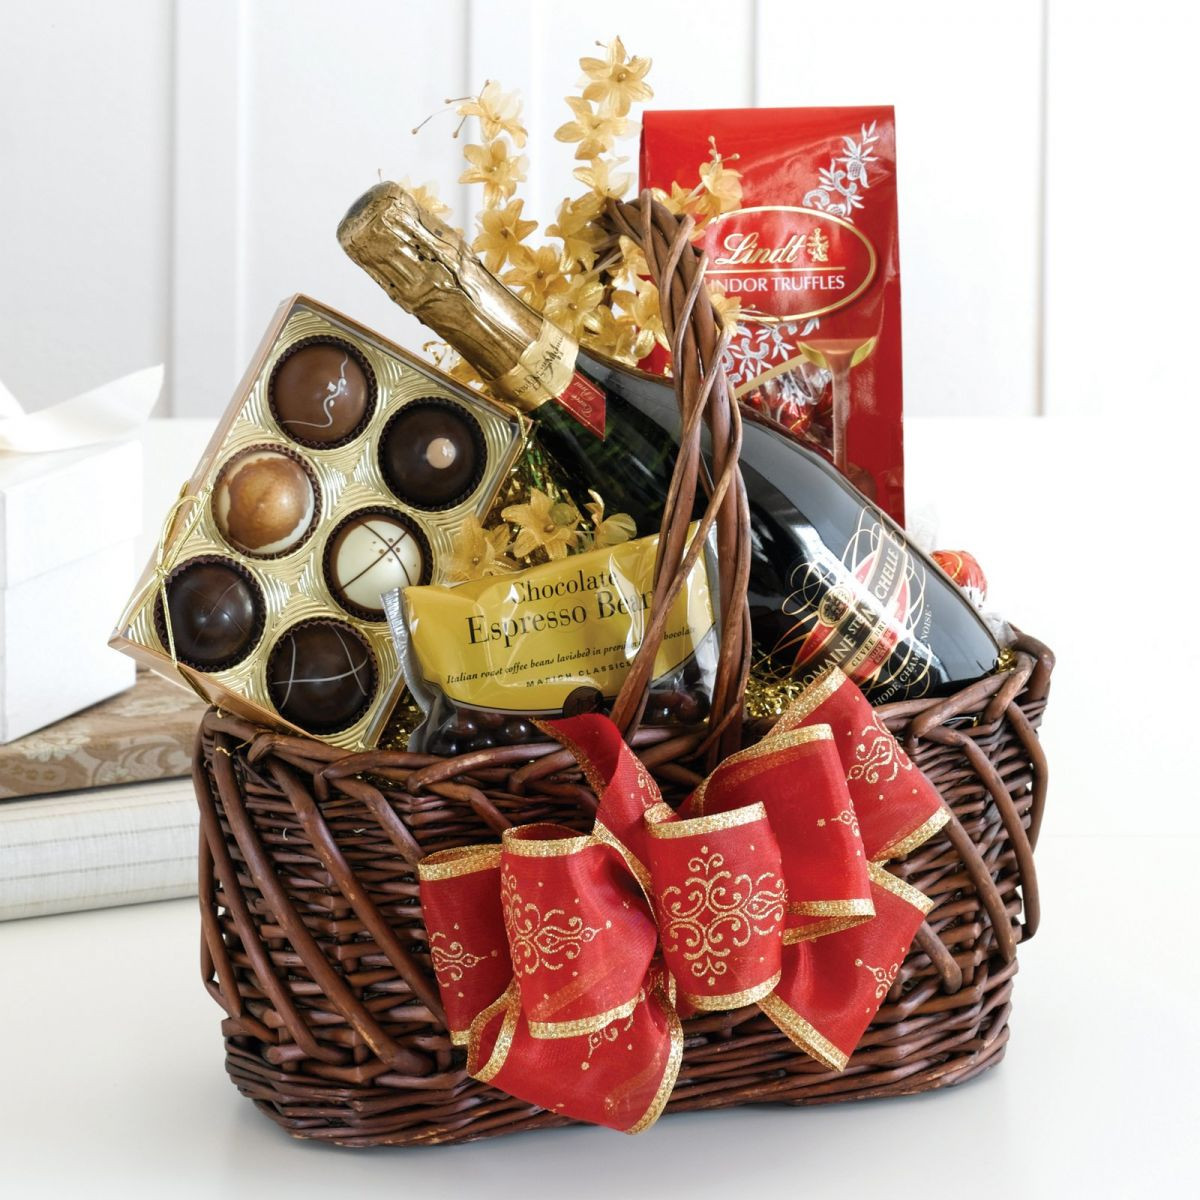 Best Gift Basket Ideas
 Top 5 Amazing Gift Basket Ideas That You’ll Love